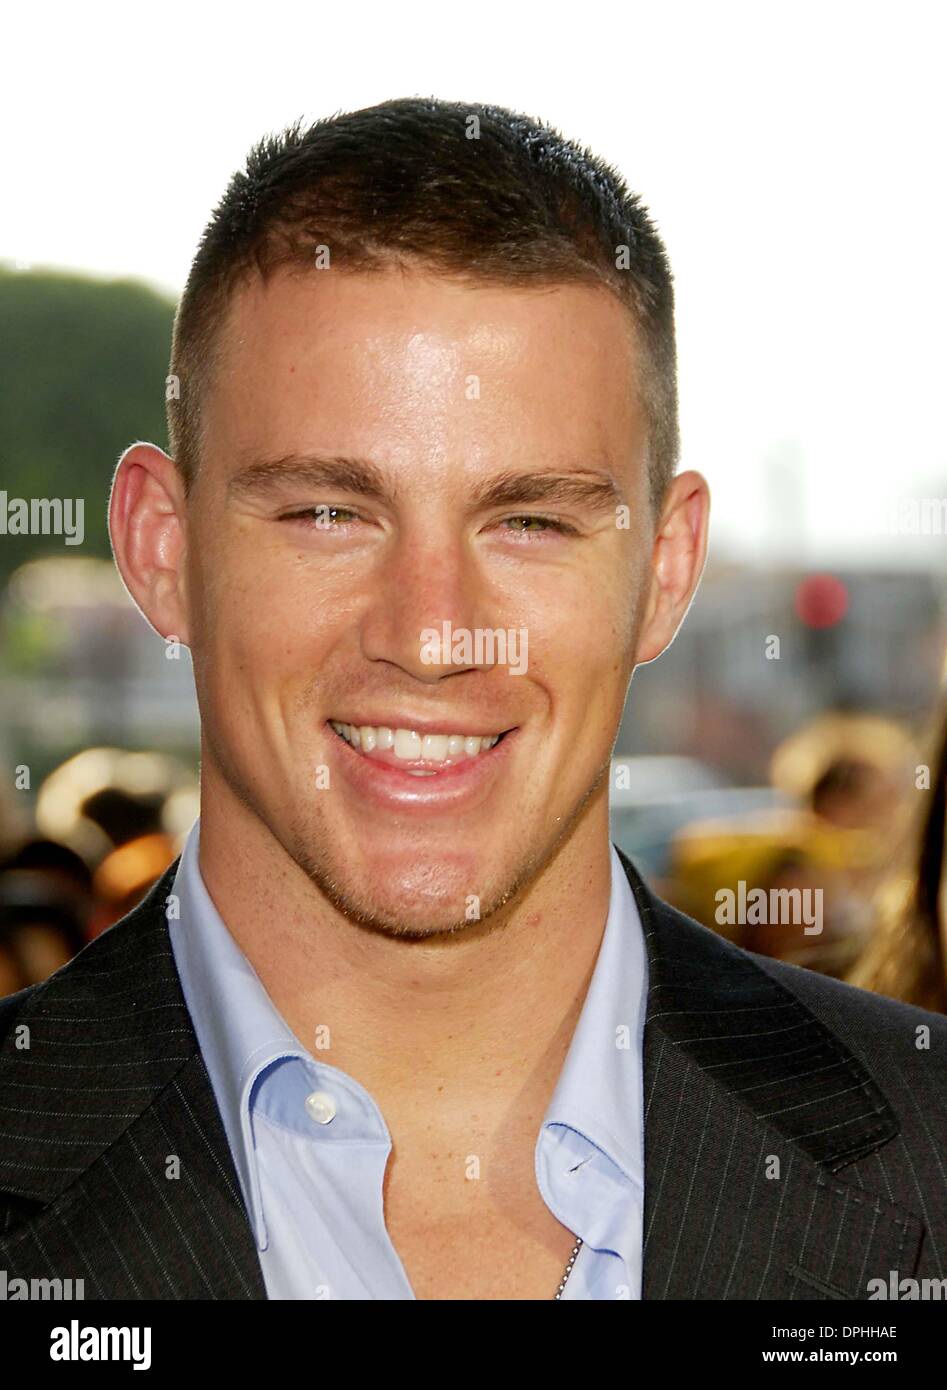 Aug. 7, 2006 - Hollywood, California, U.S. - K49268MGE.LOS ANGELES, CA AUGUST 07, 2006.Actress CHANNING TATUM during the premiere of the new movie from Touchstone Pictures' STEP UP held at the Arclight Cinemas, on August 7, 2006, in Los Angeles.(Credit Image: © Michael Germana/Globe Photos/ZUMAPRESS.com) Stock Photo